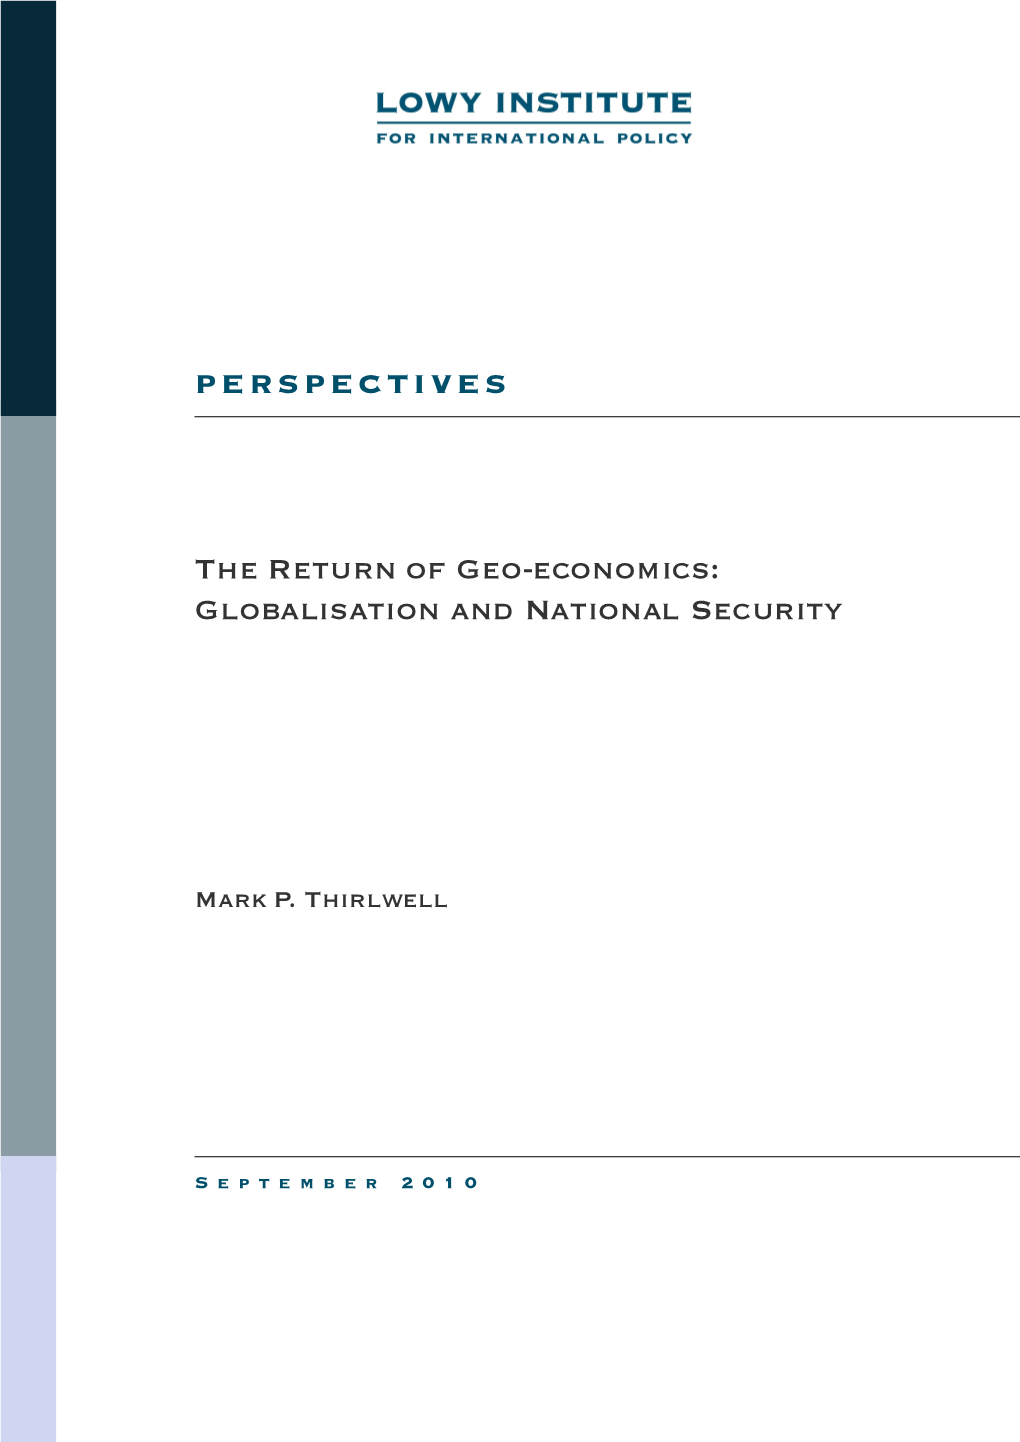 The Return of Geo-Economics: Globalisation and National Security